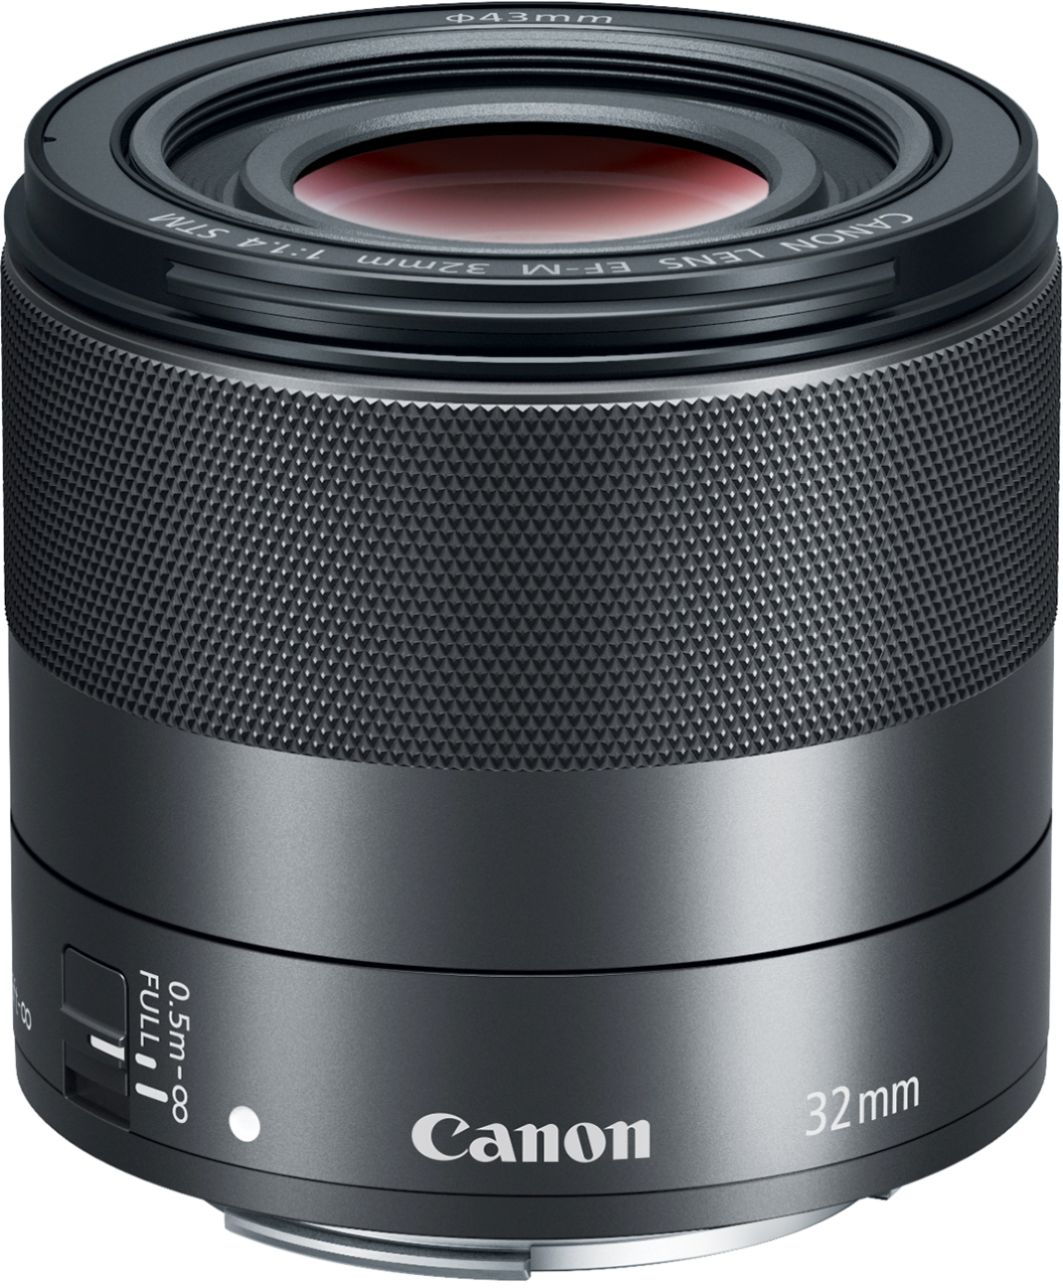 Back View: Canon - EF-M 55-200mm f/4.5-6.3 IS STM Telephoto Zoom Lens for EOS M Series Cameras - Silver